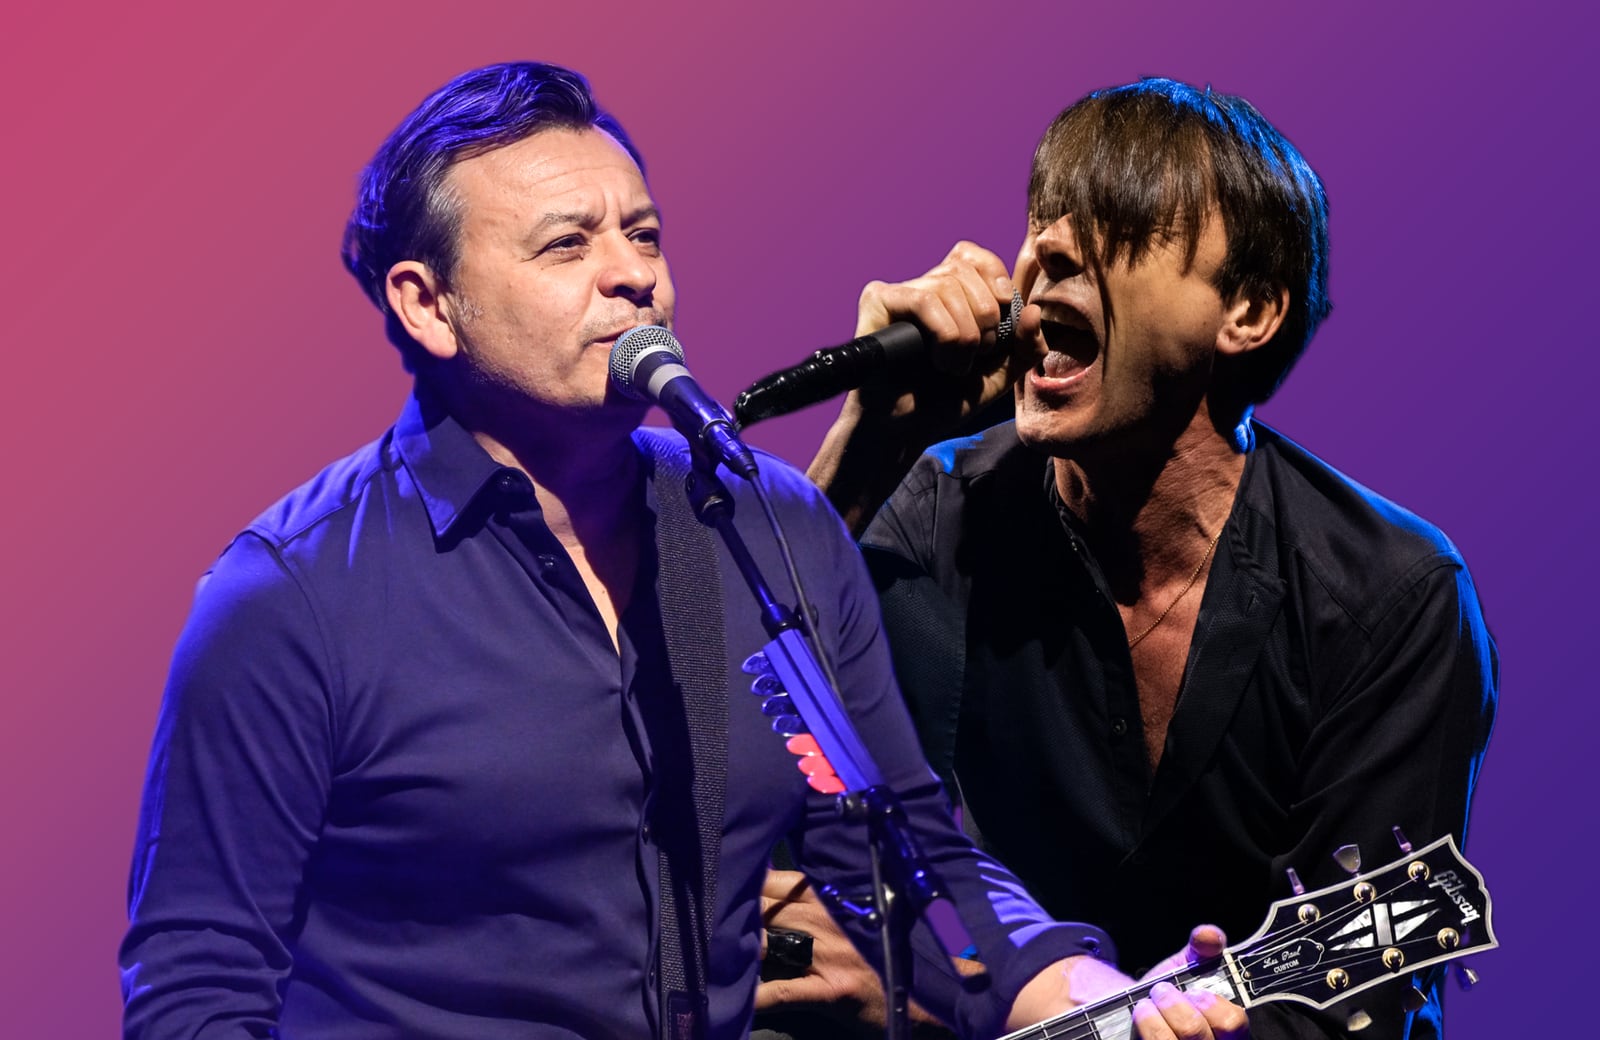 James Dean Bradfield of the Manic Street Preachers and and Brett Anderson of Suede